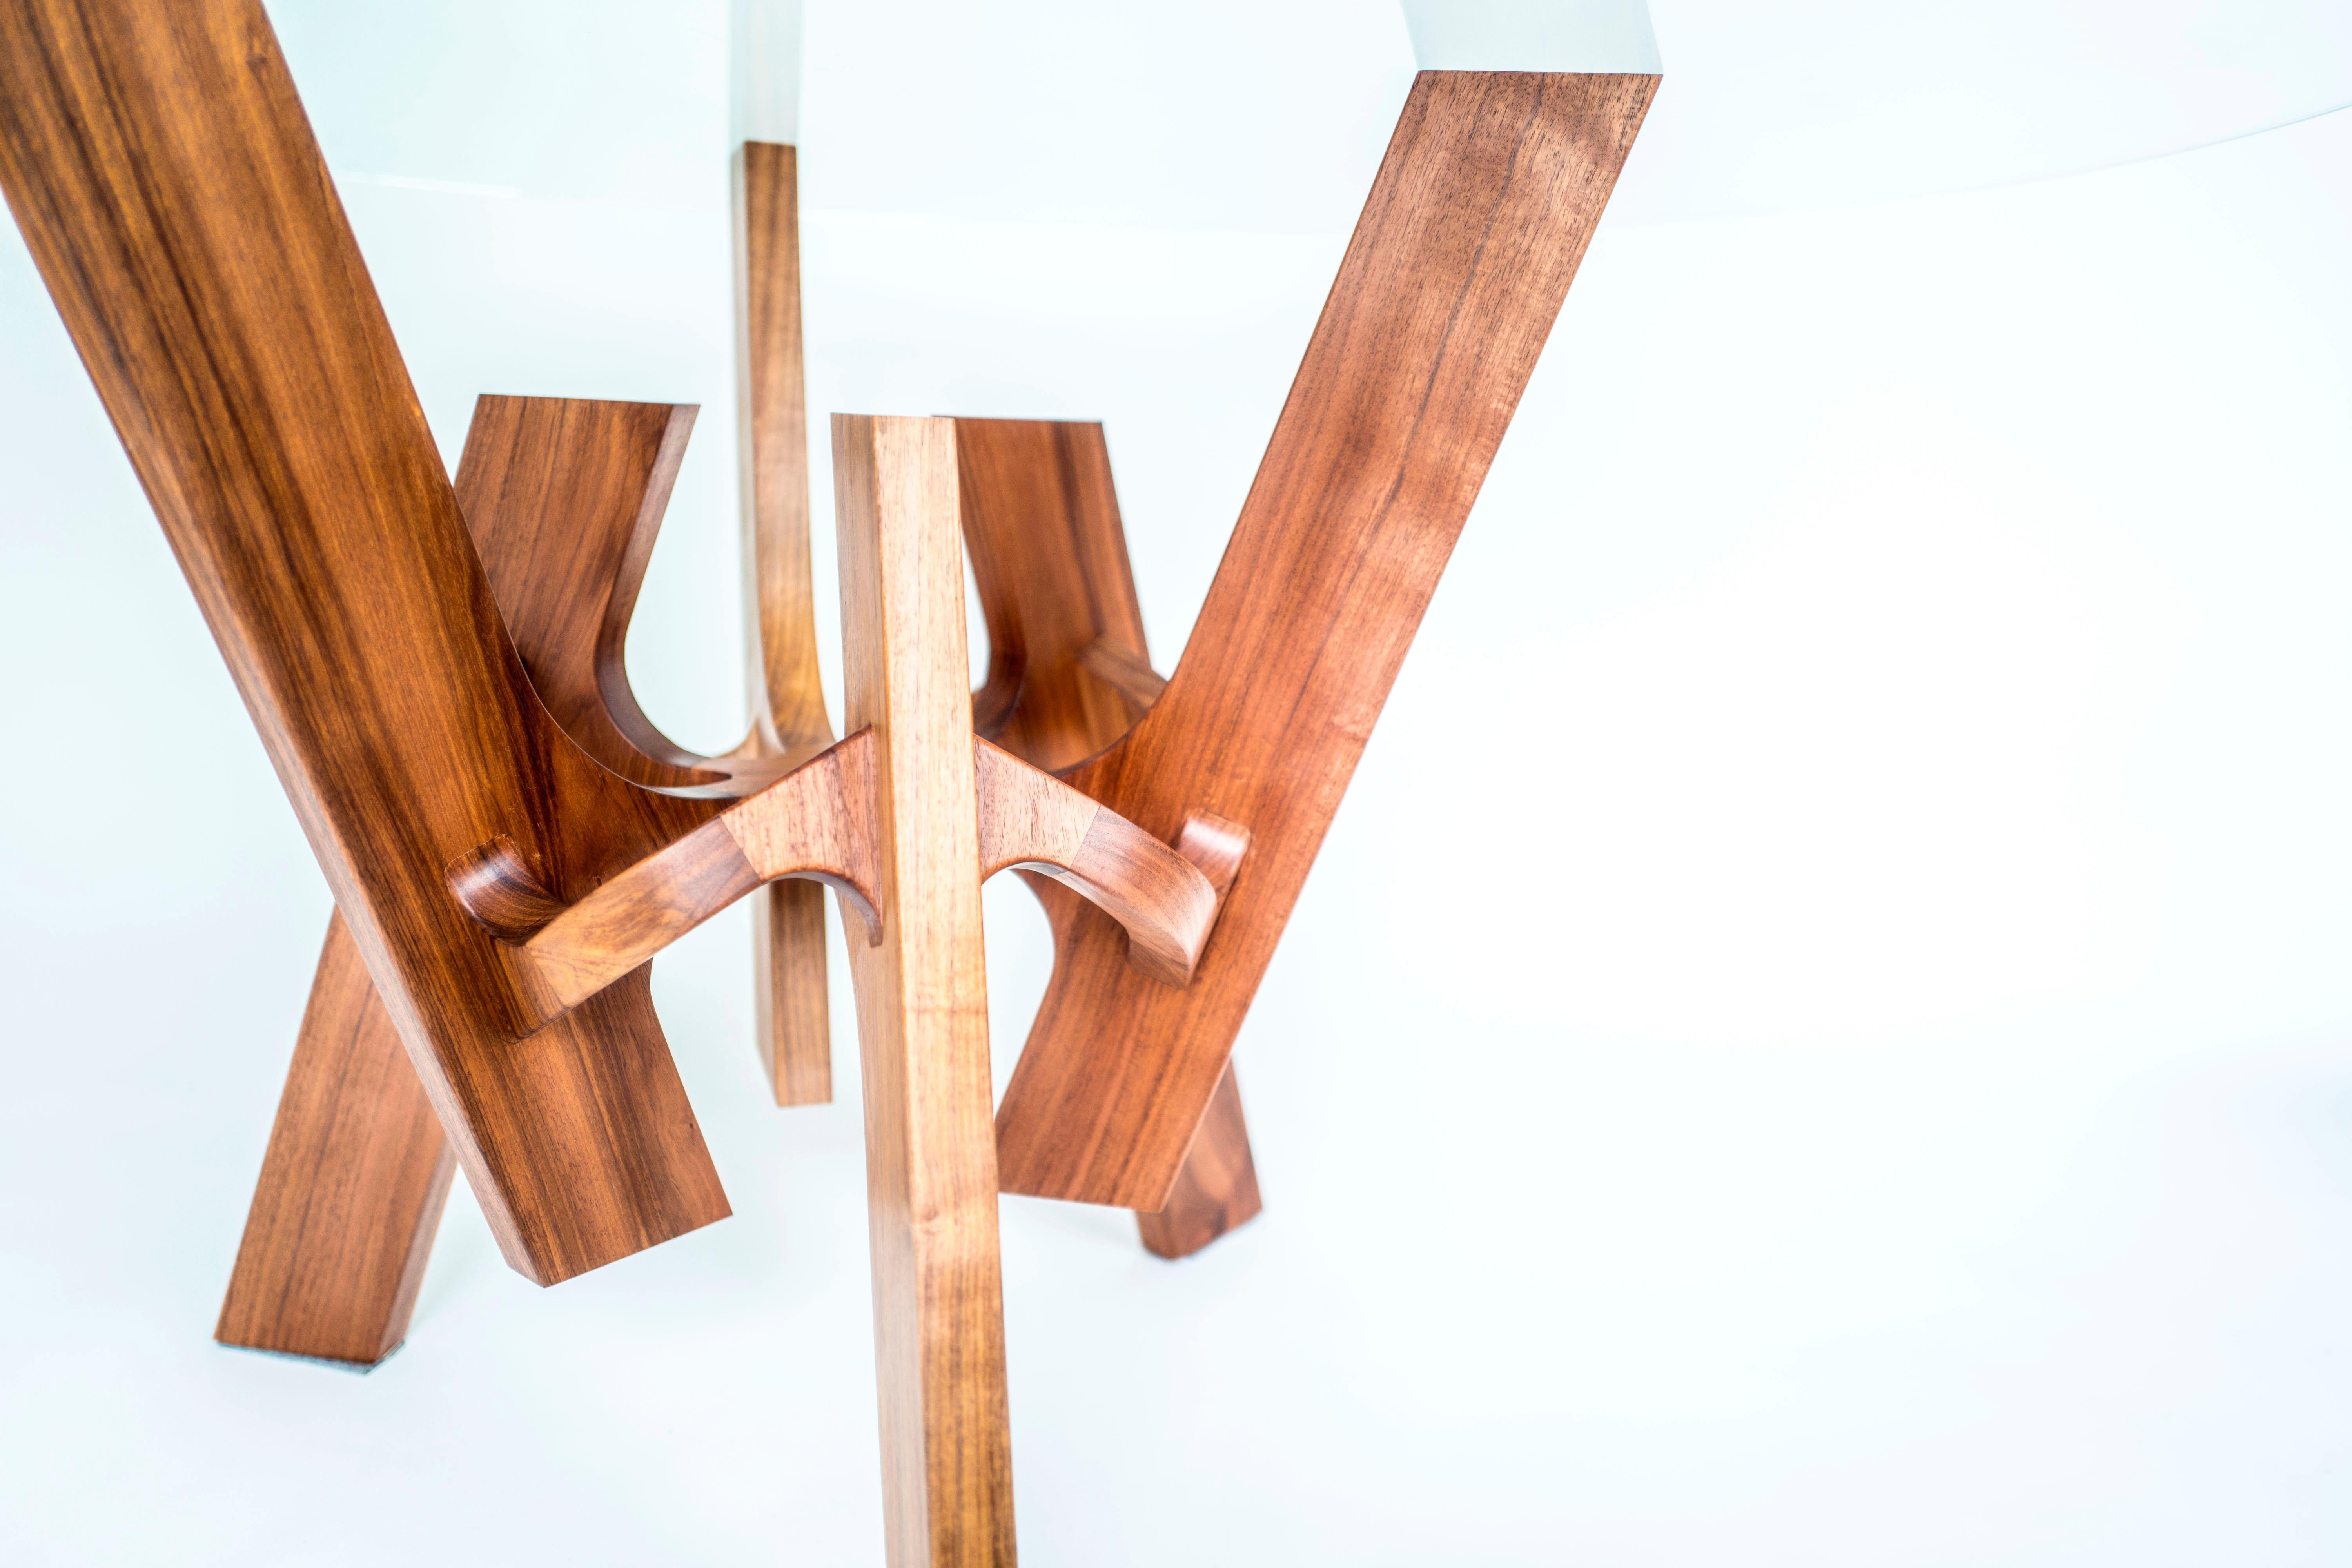 Hand-Crafted Astra, Geometric Sculptural Center Table Made of Solid Wood by Pedro Cerisola For Sale